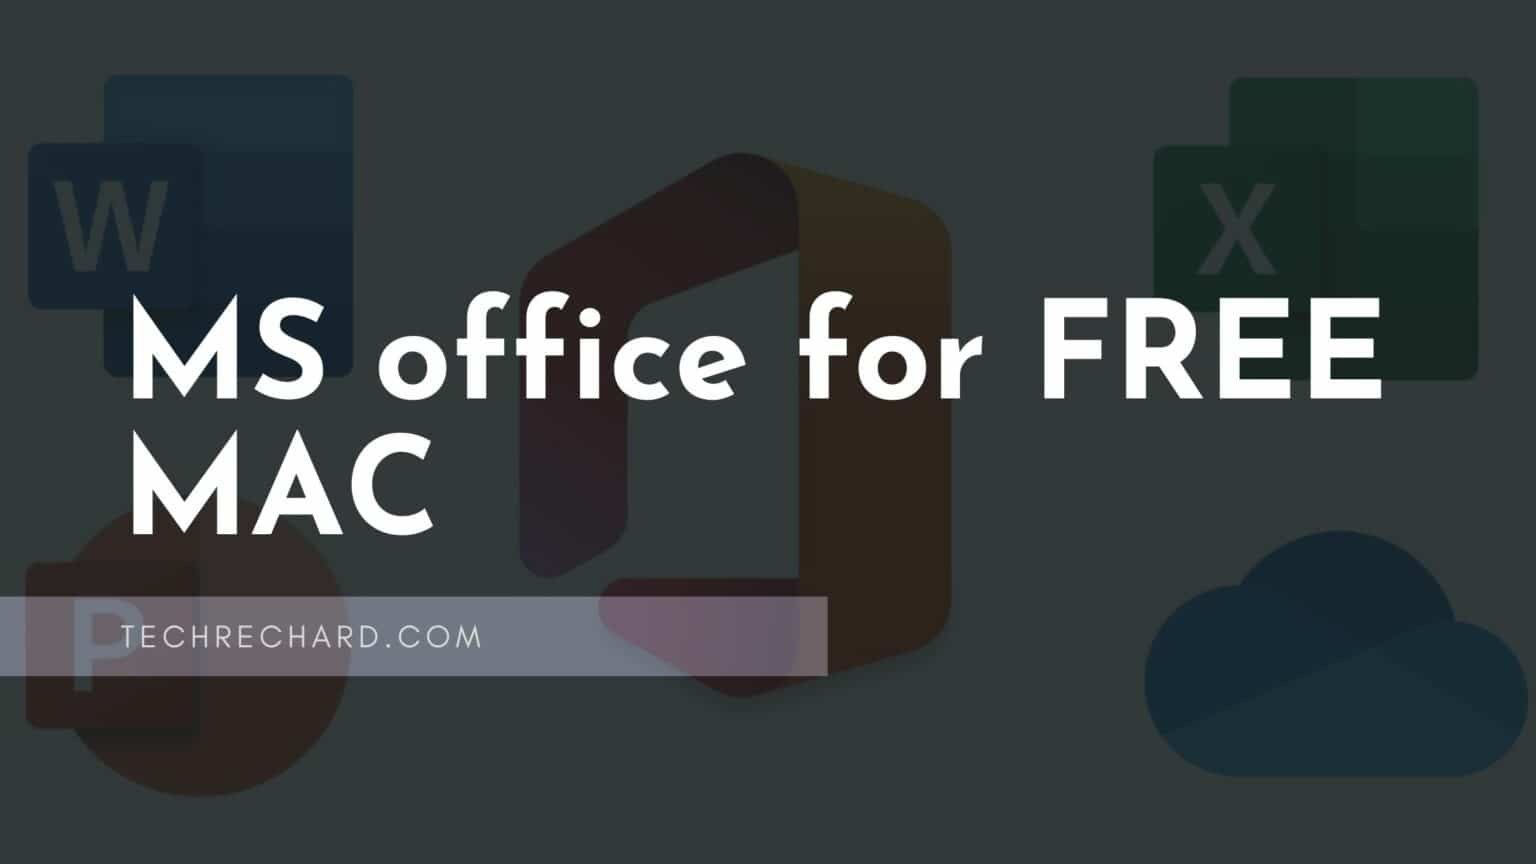 Download ms office for free mac logitech m510 software download